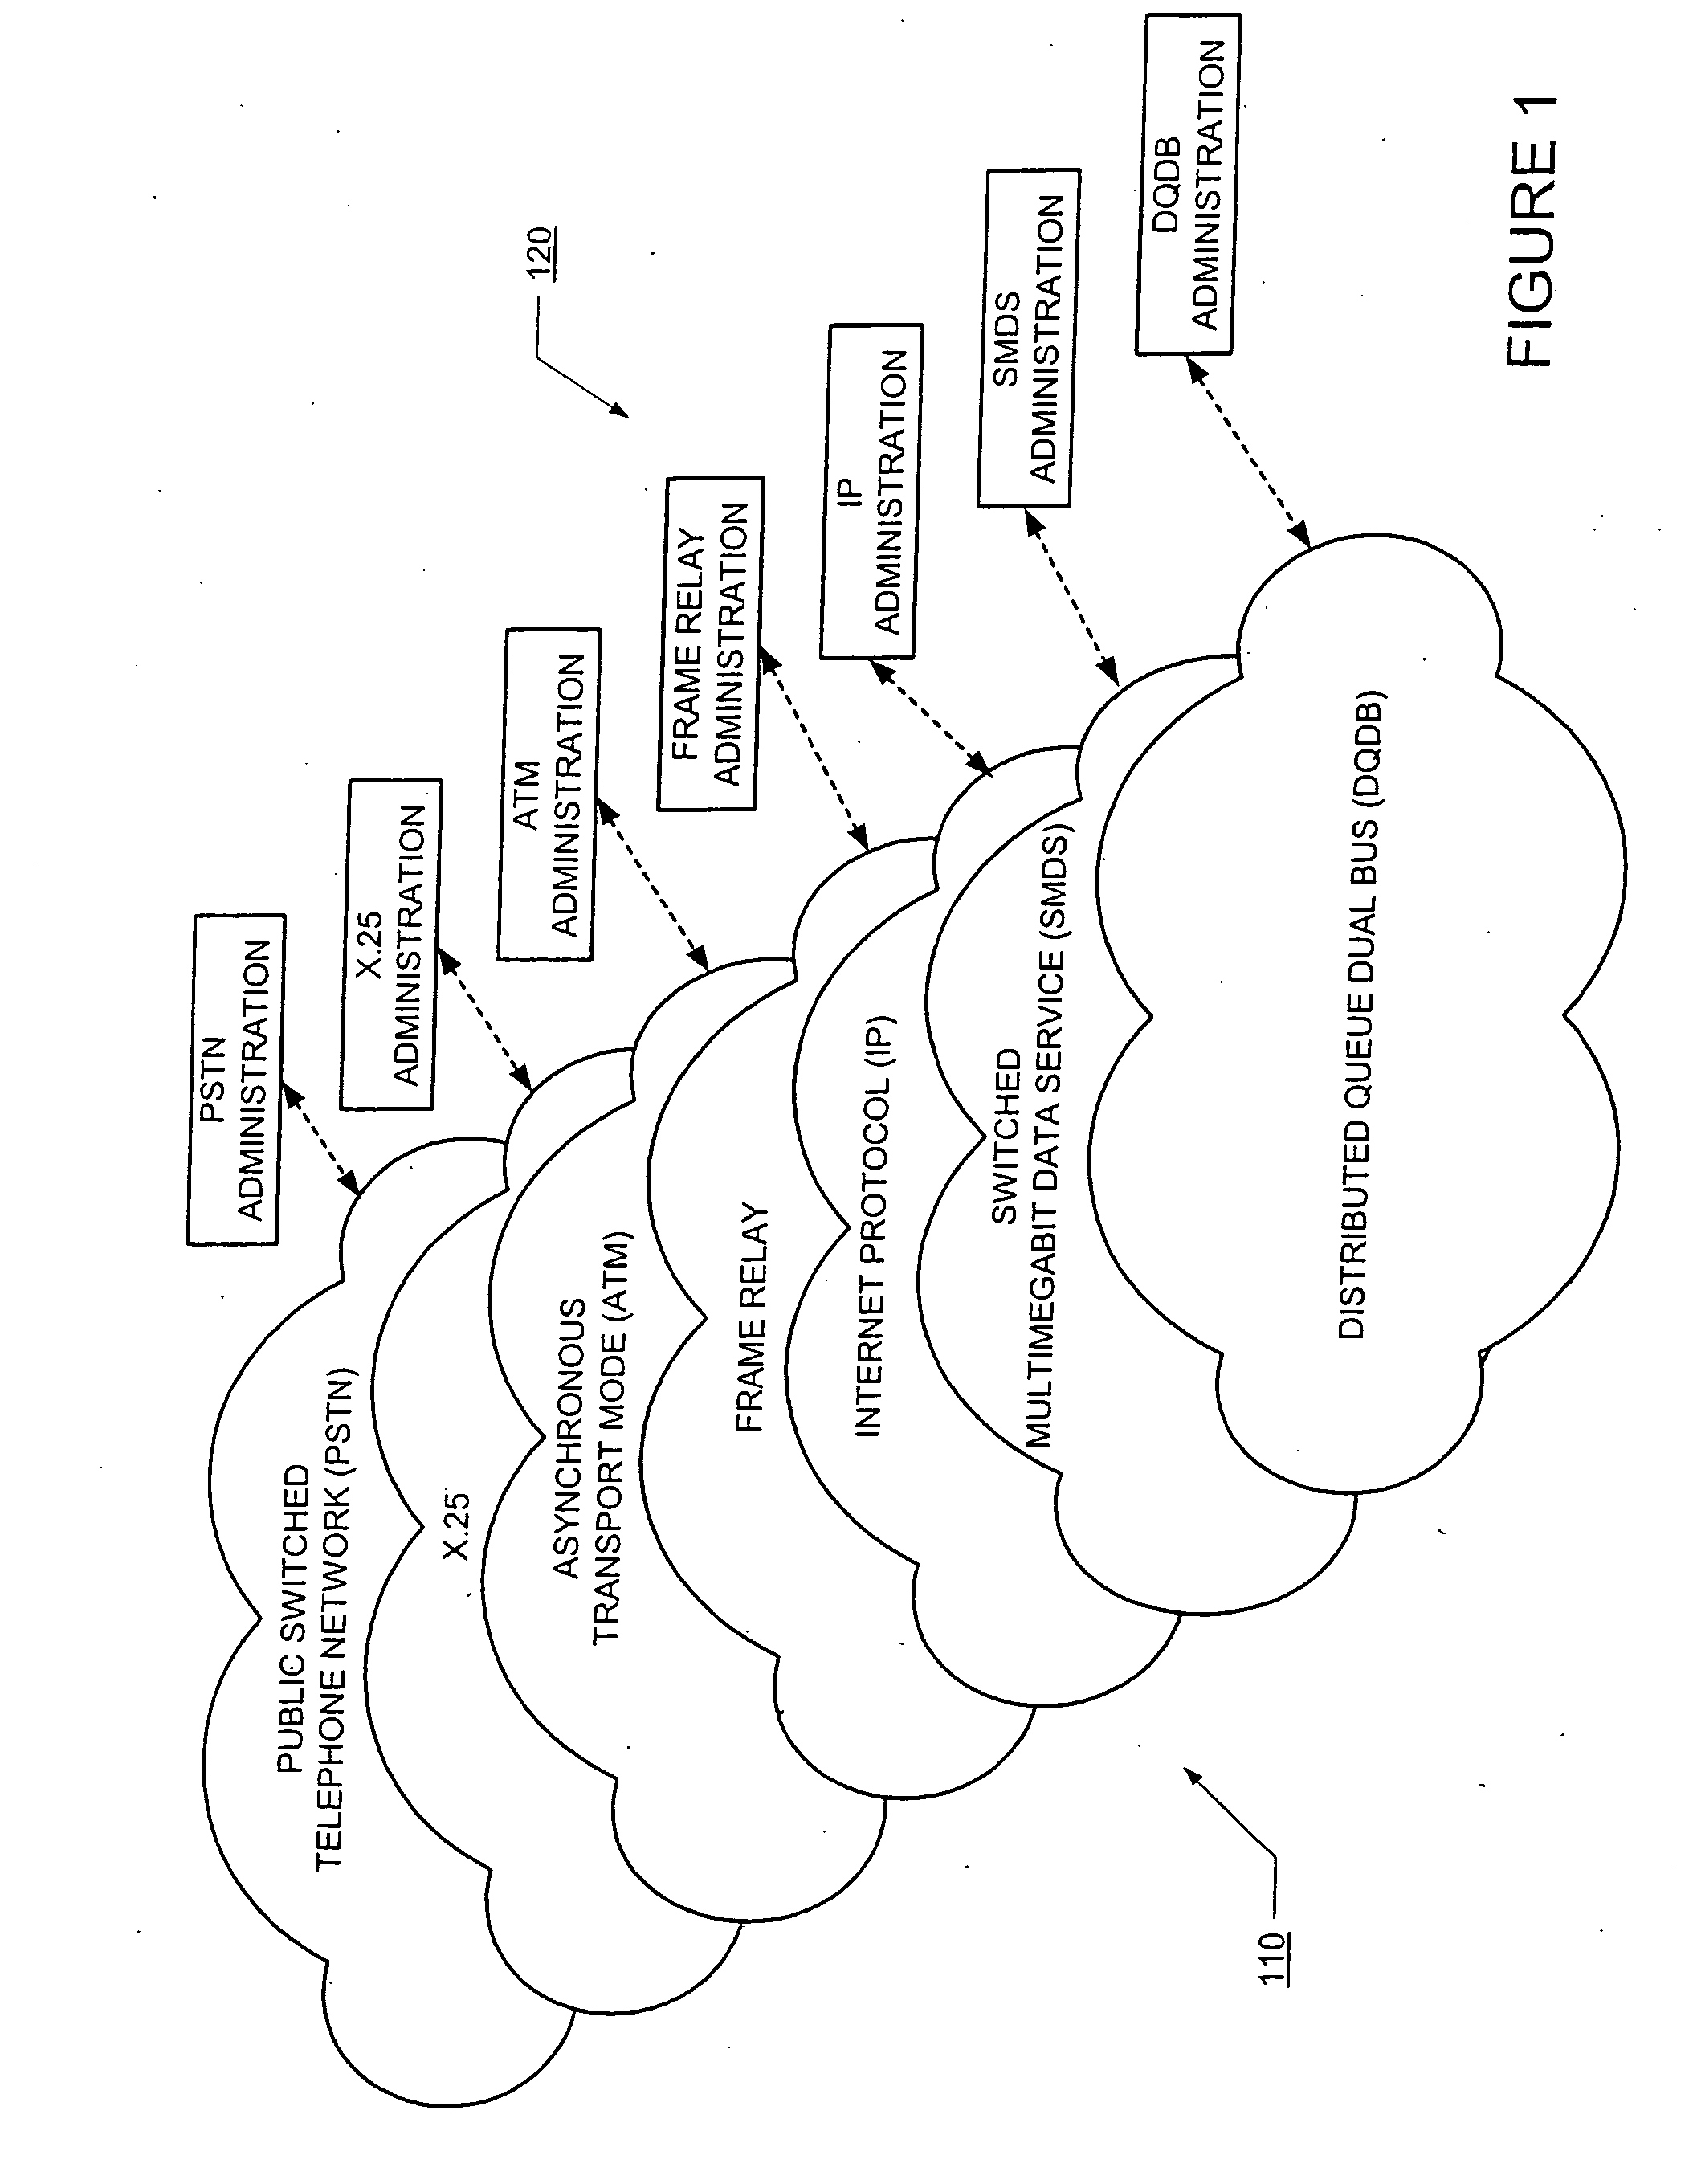 Transport networks supporting virtual private networks, and configuring such networks